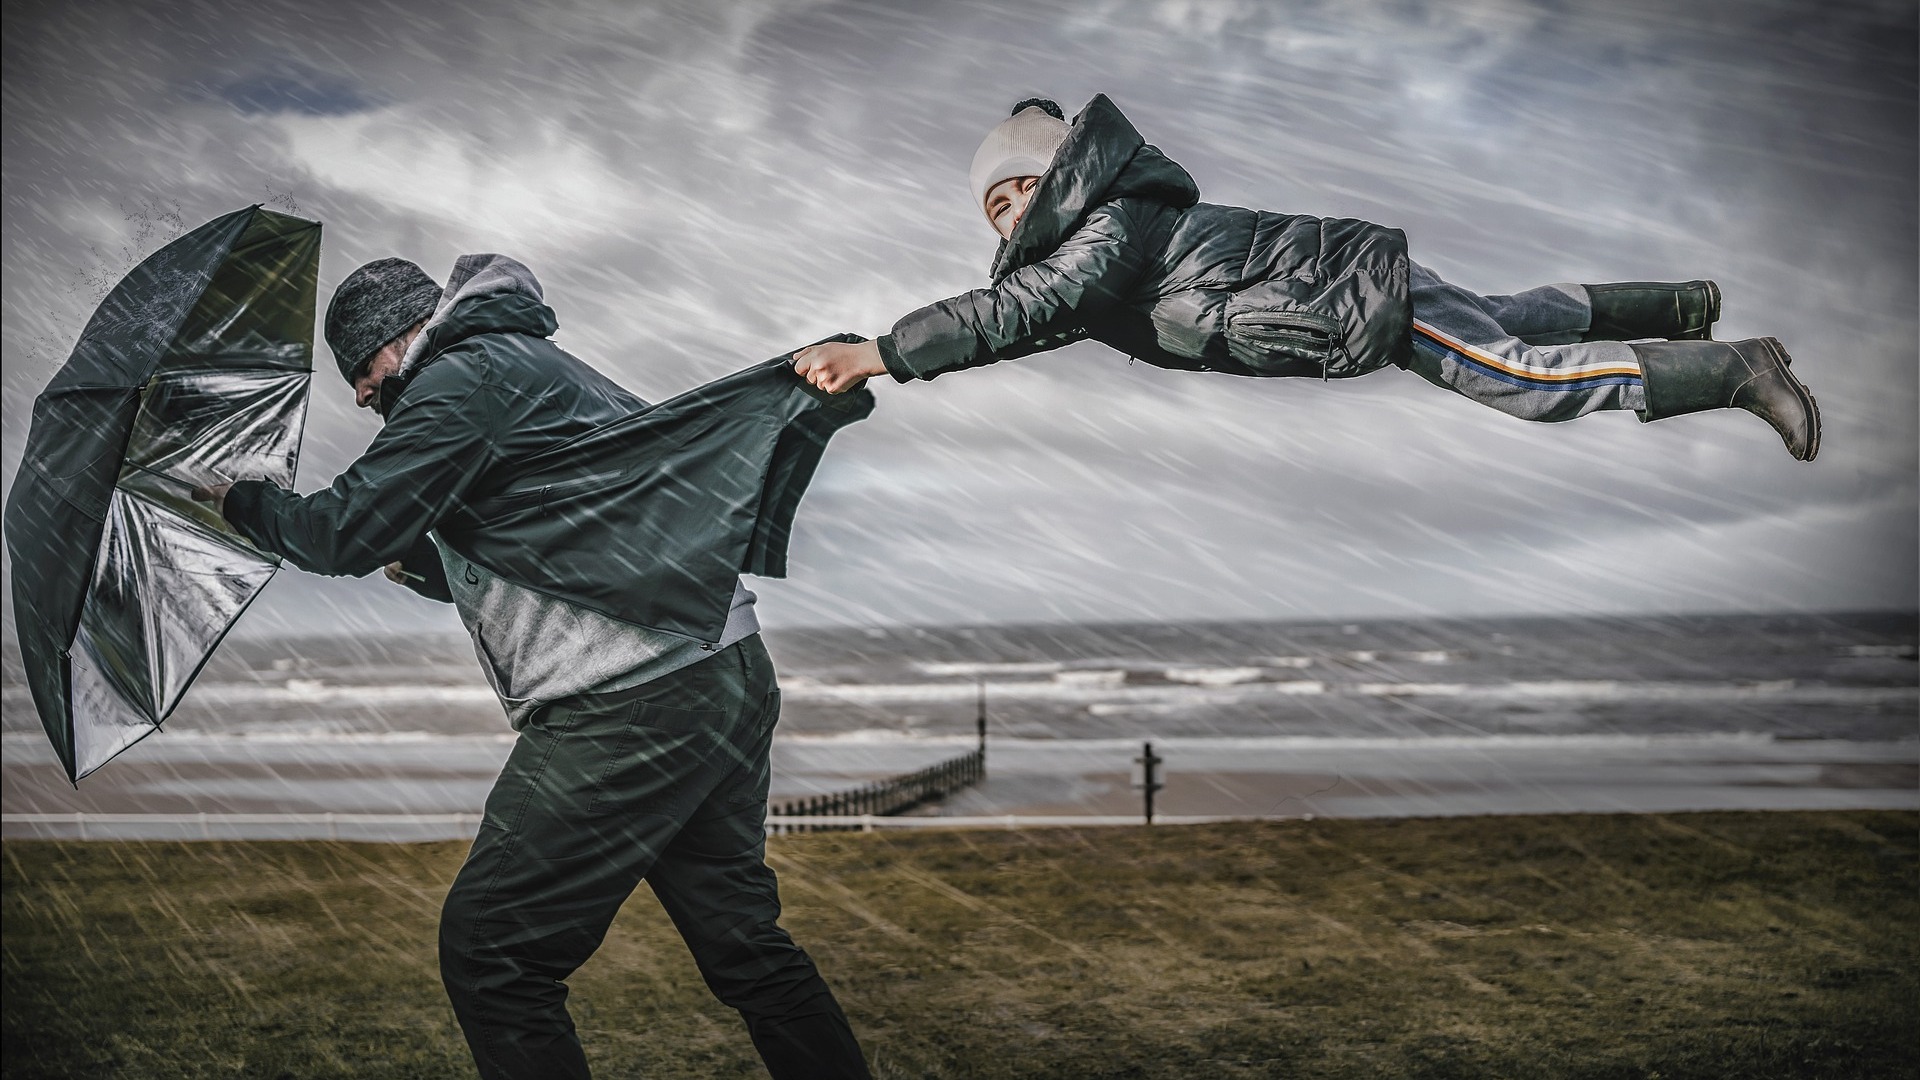 Image shows father and son in the kind of windy weather unsuitable for bouncy castle hire weather